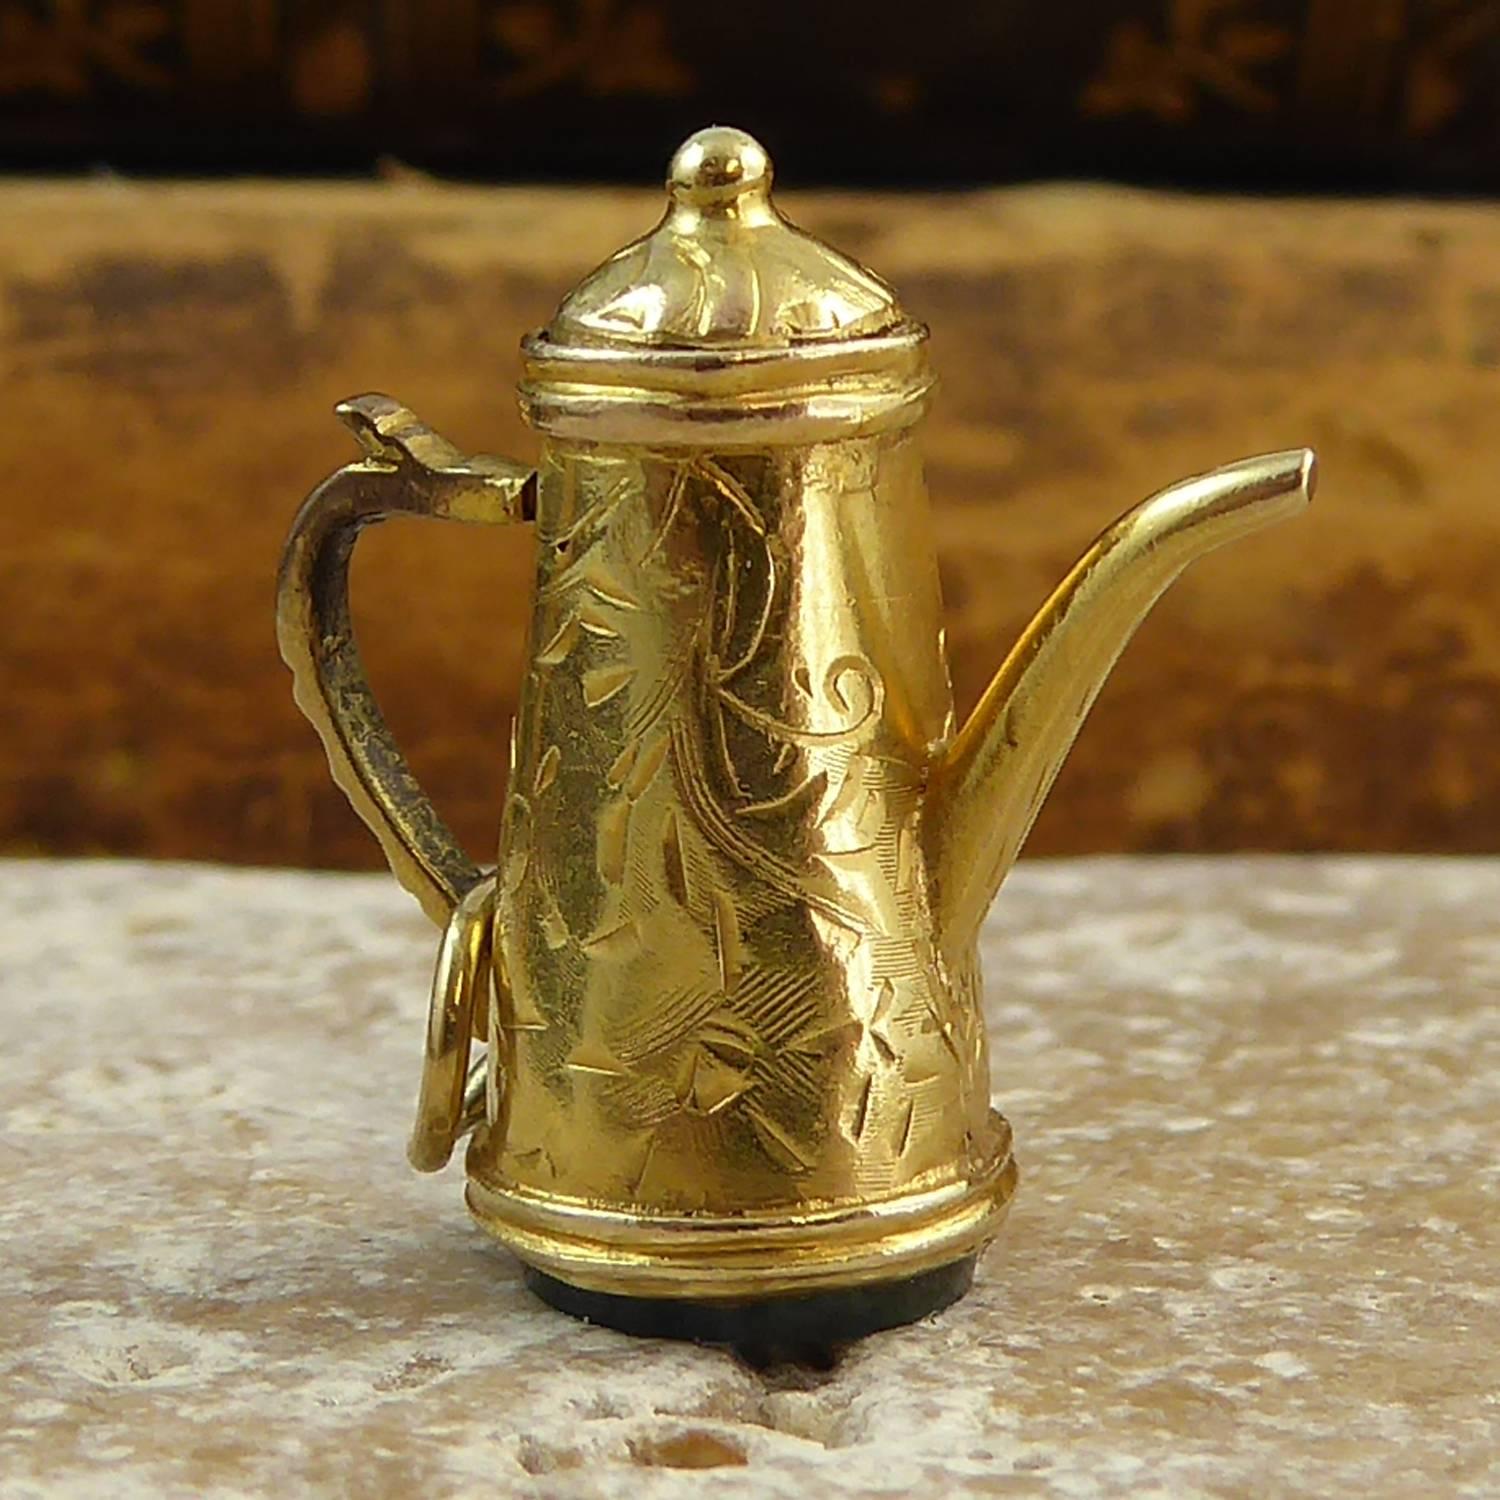 An antique fob style gold charm dating from the late Edwardian era.  In the form of a coffee pot, the charm is very nicely detailed with a floral hand engraved pattern to the body and cover of the coffee pot. The base is a flat disc of bloodstone